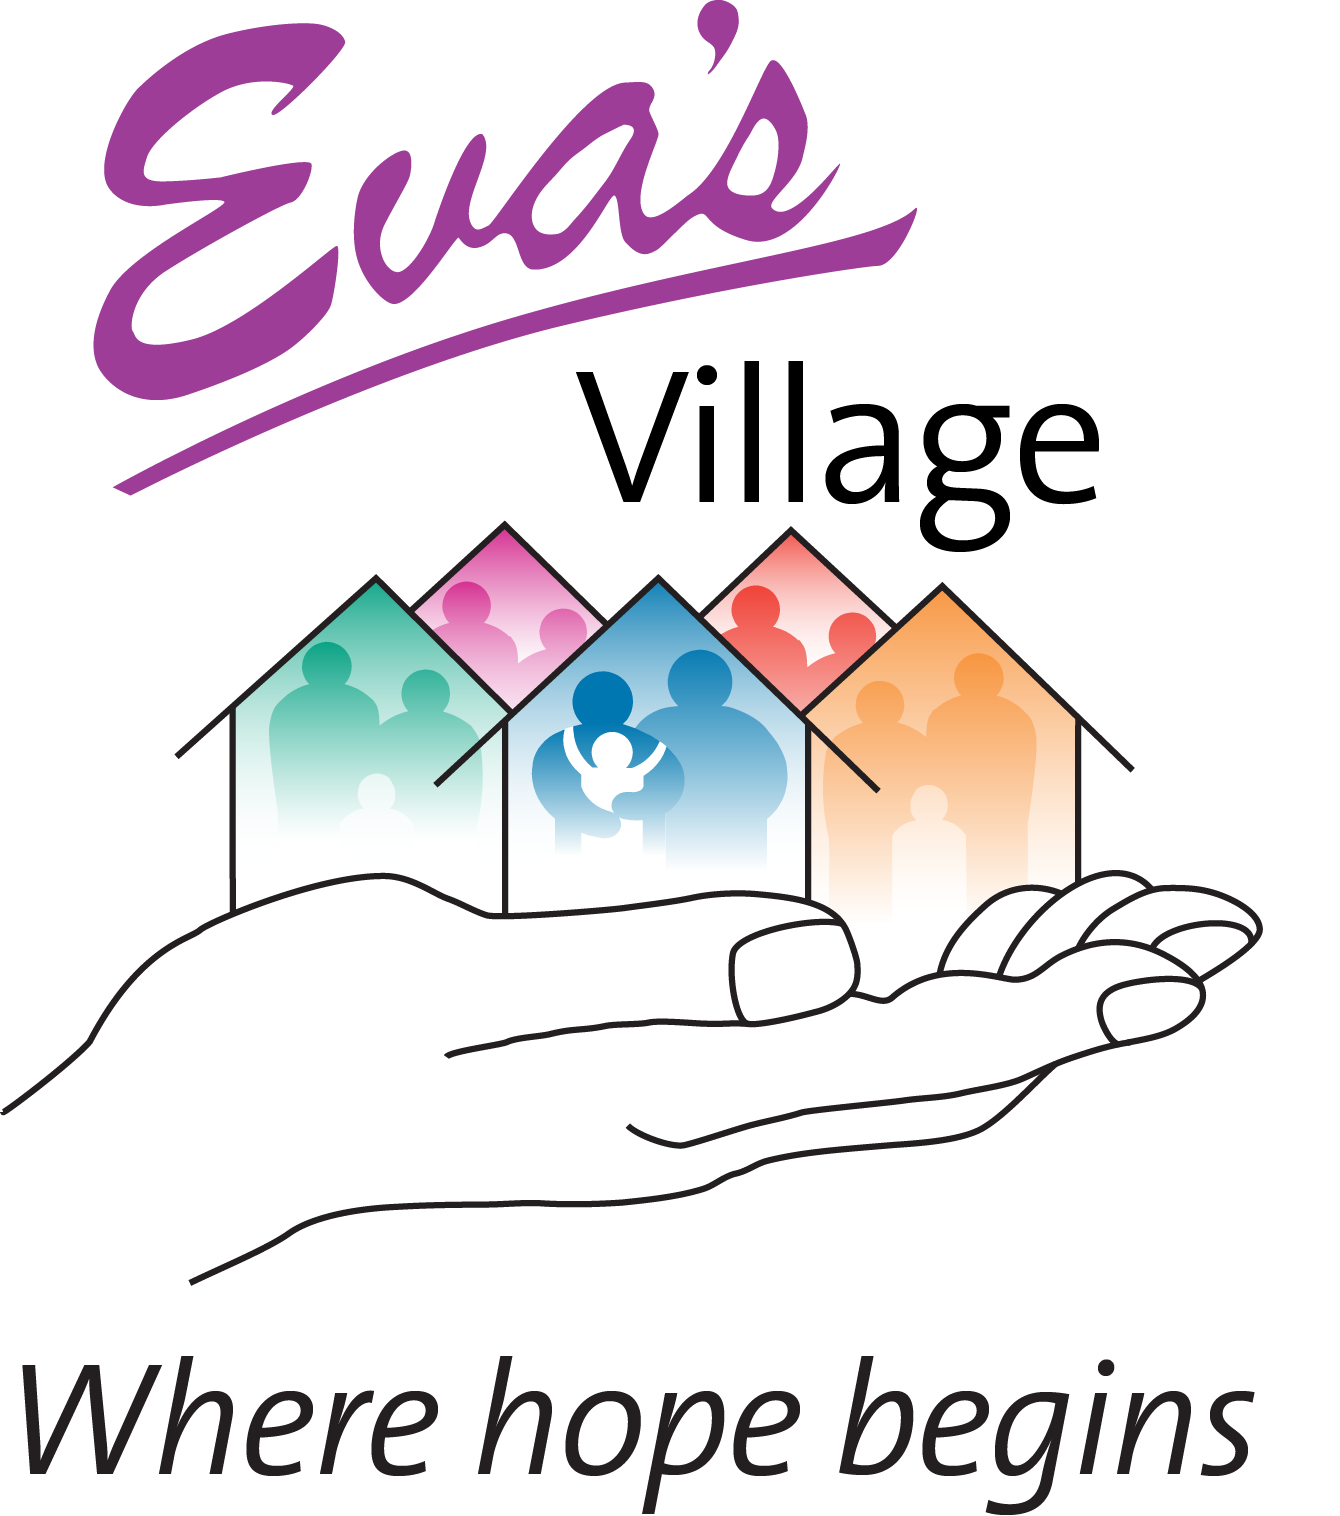 Eva’s Village mission is to feed the hungry, shelter the homeless, treat the addicted, and provide medical and dental care to the poor with respect for the human dignity of each individual.